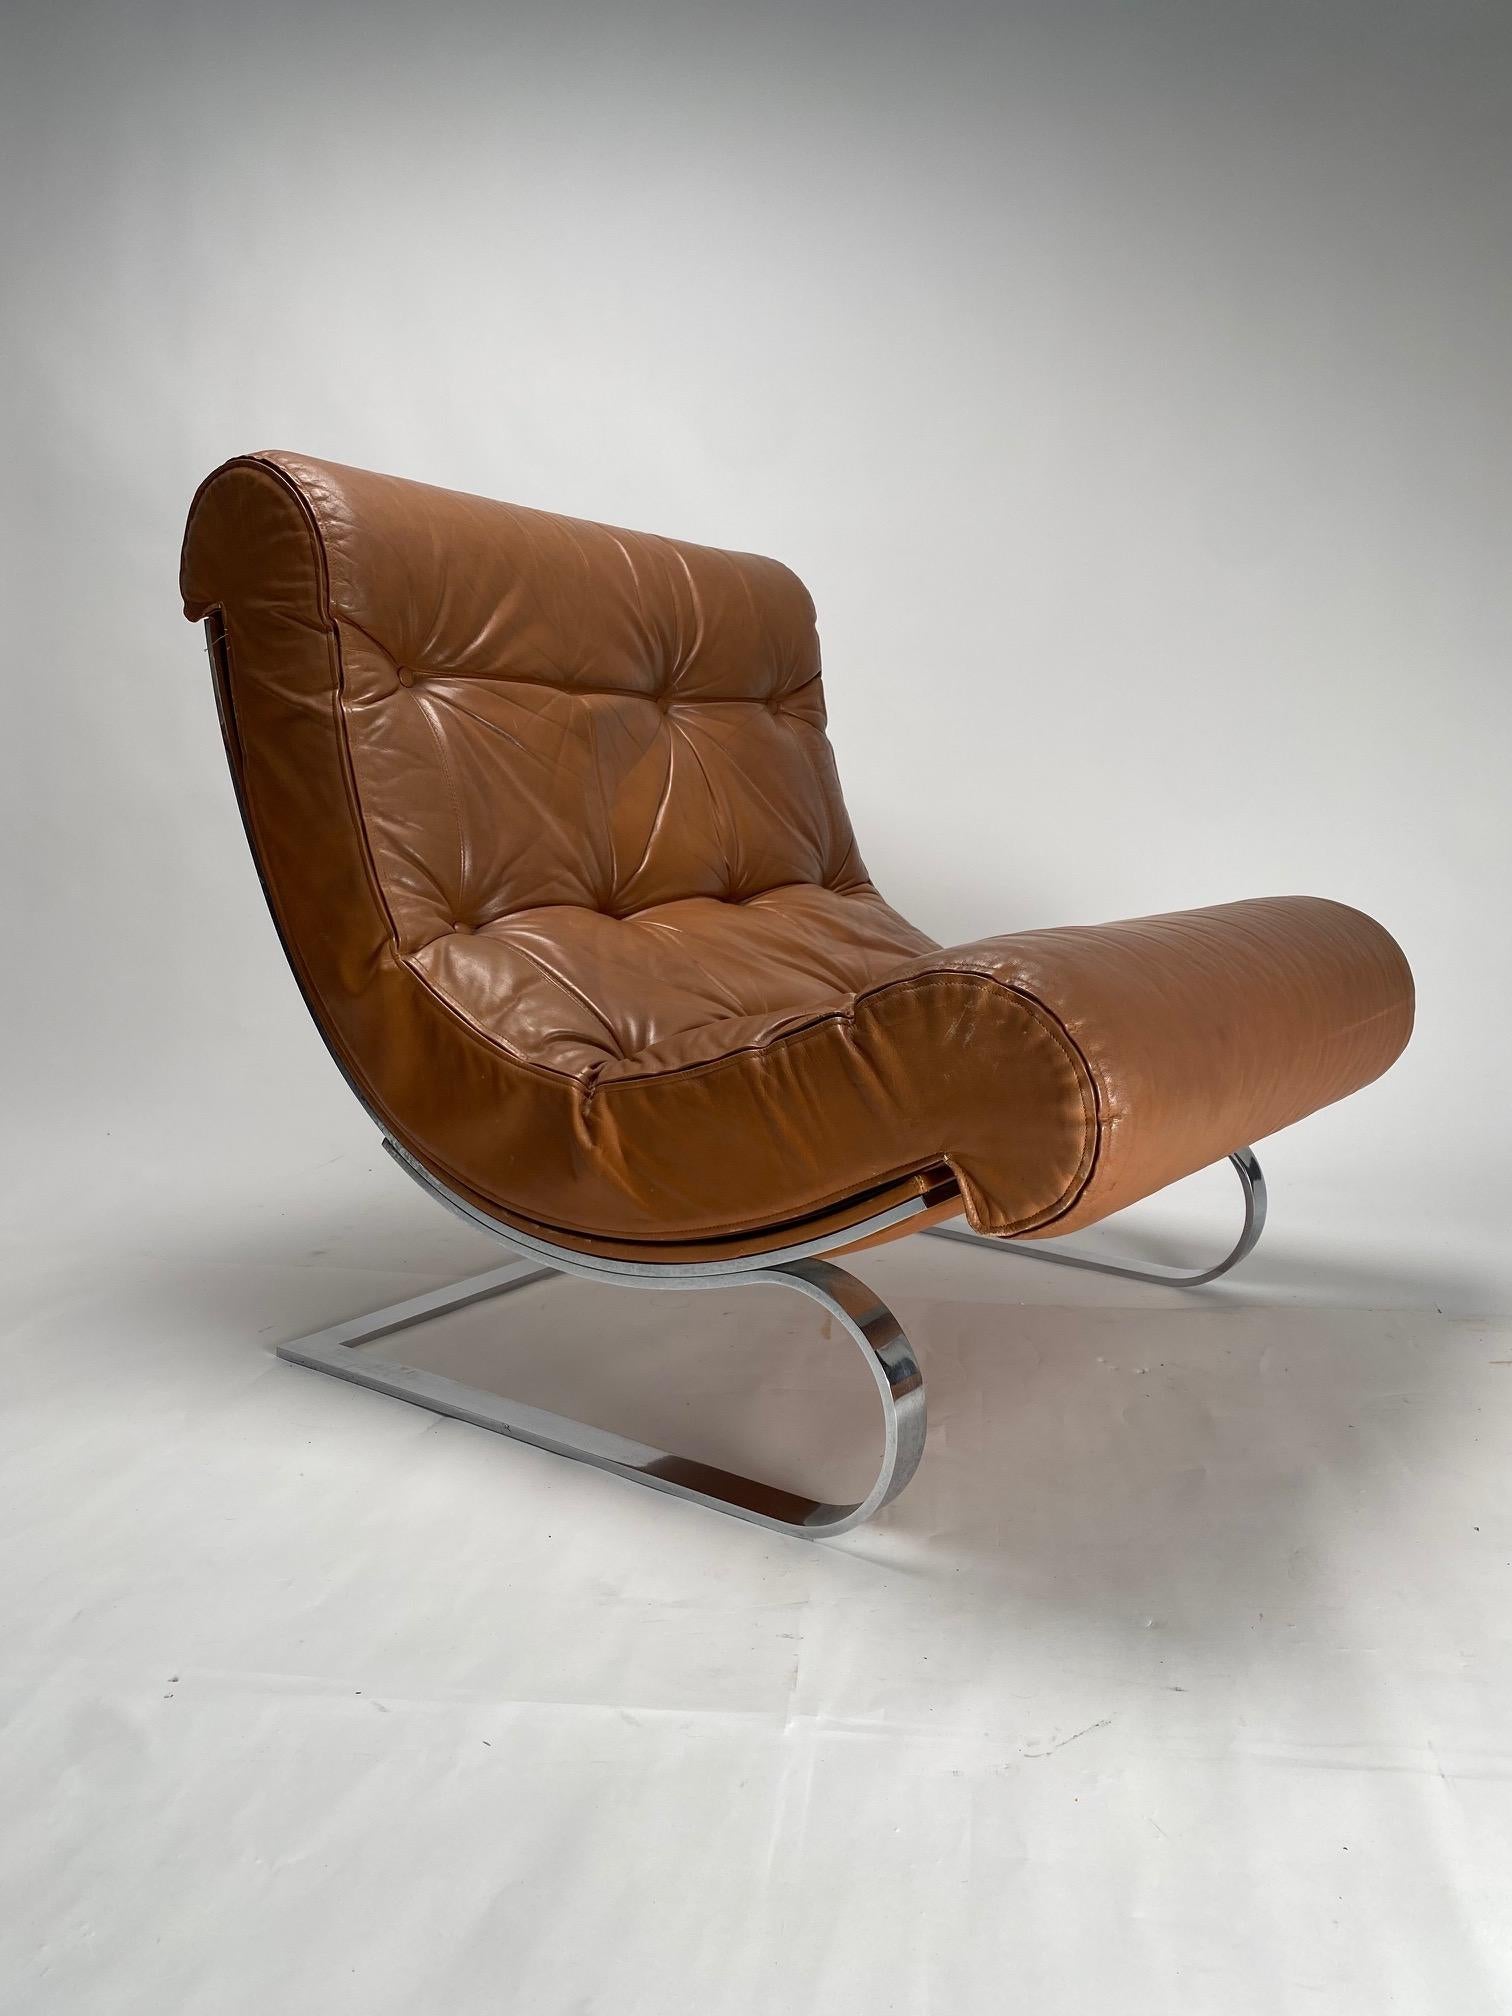 Space Age Lounge Armchair by Renato Balestra for Cinova, Italy 1970s For Sale